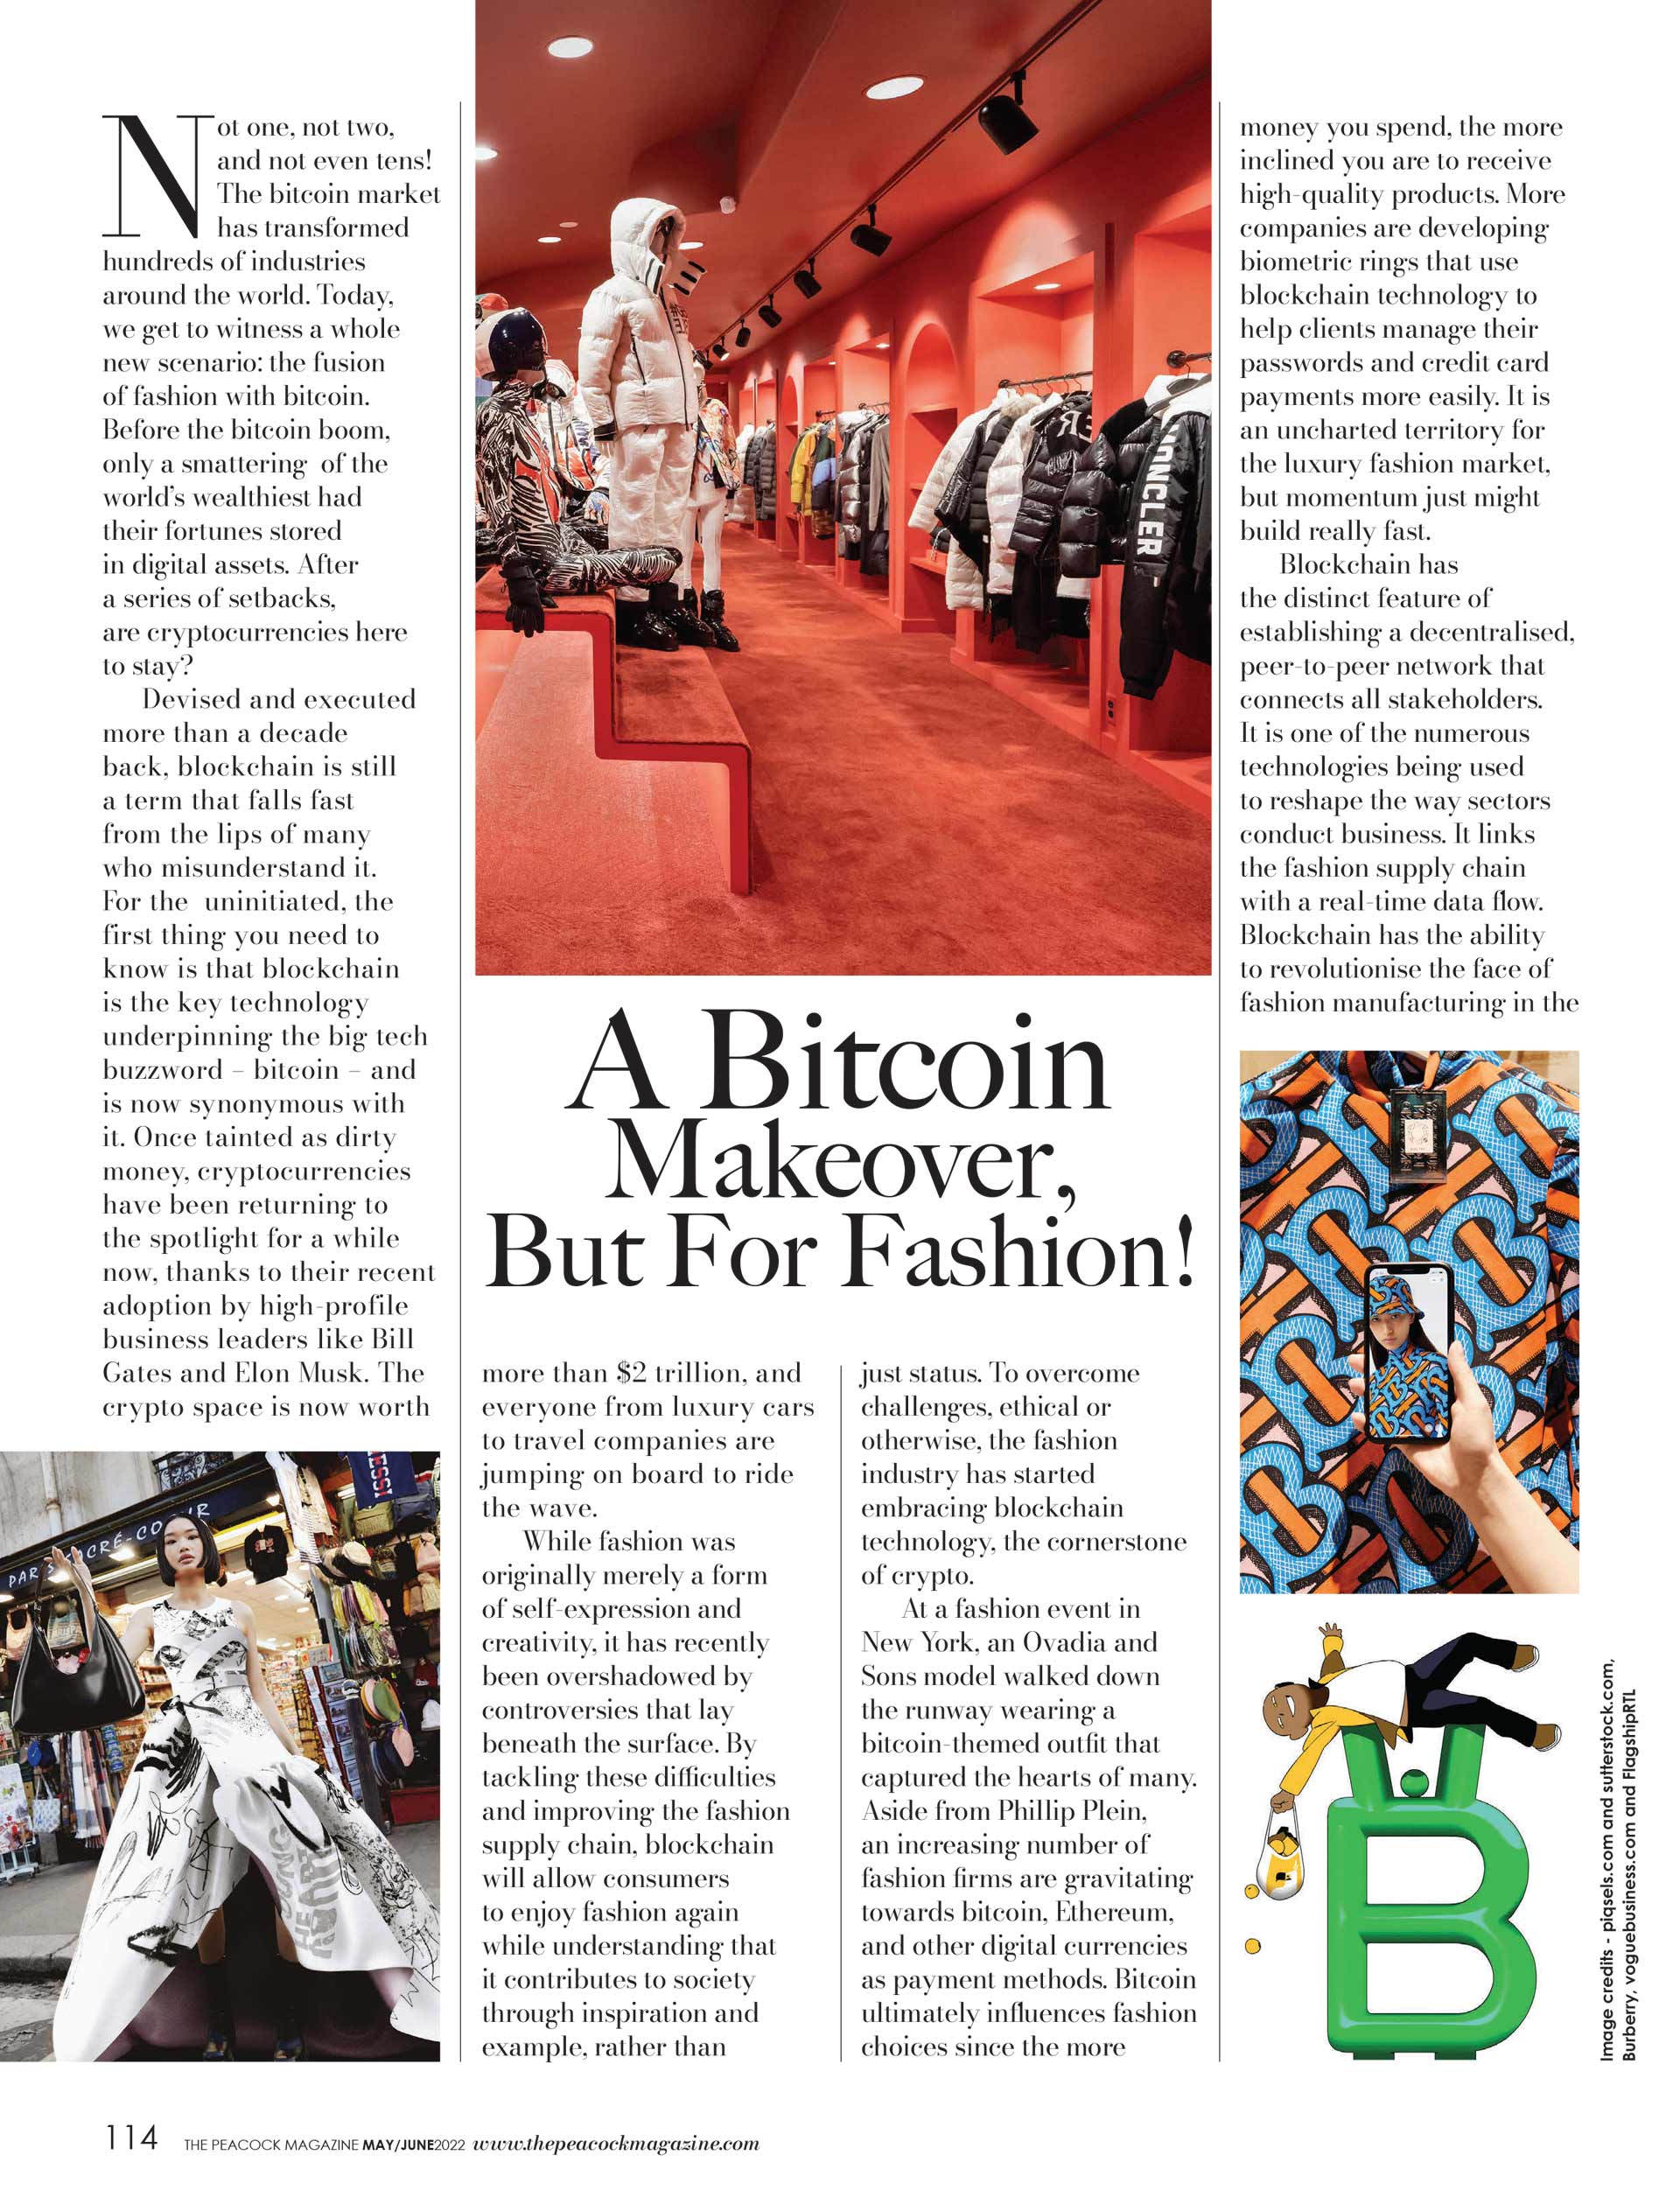 A bitcoin makeover, but for fashion!